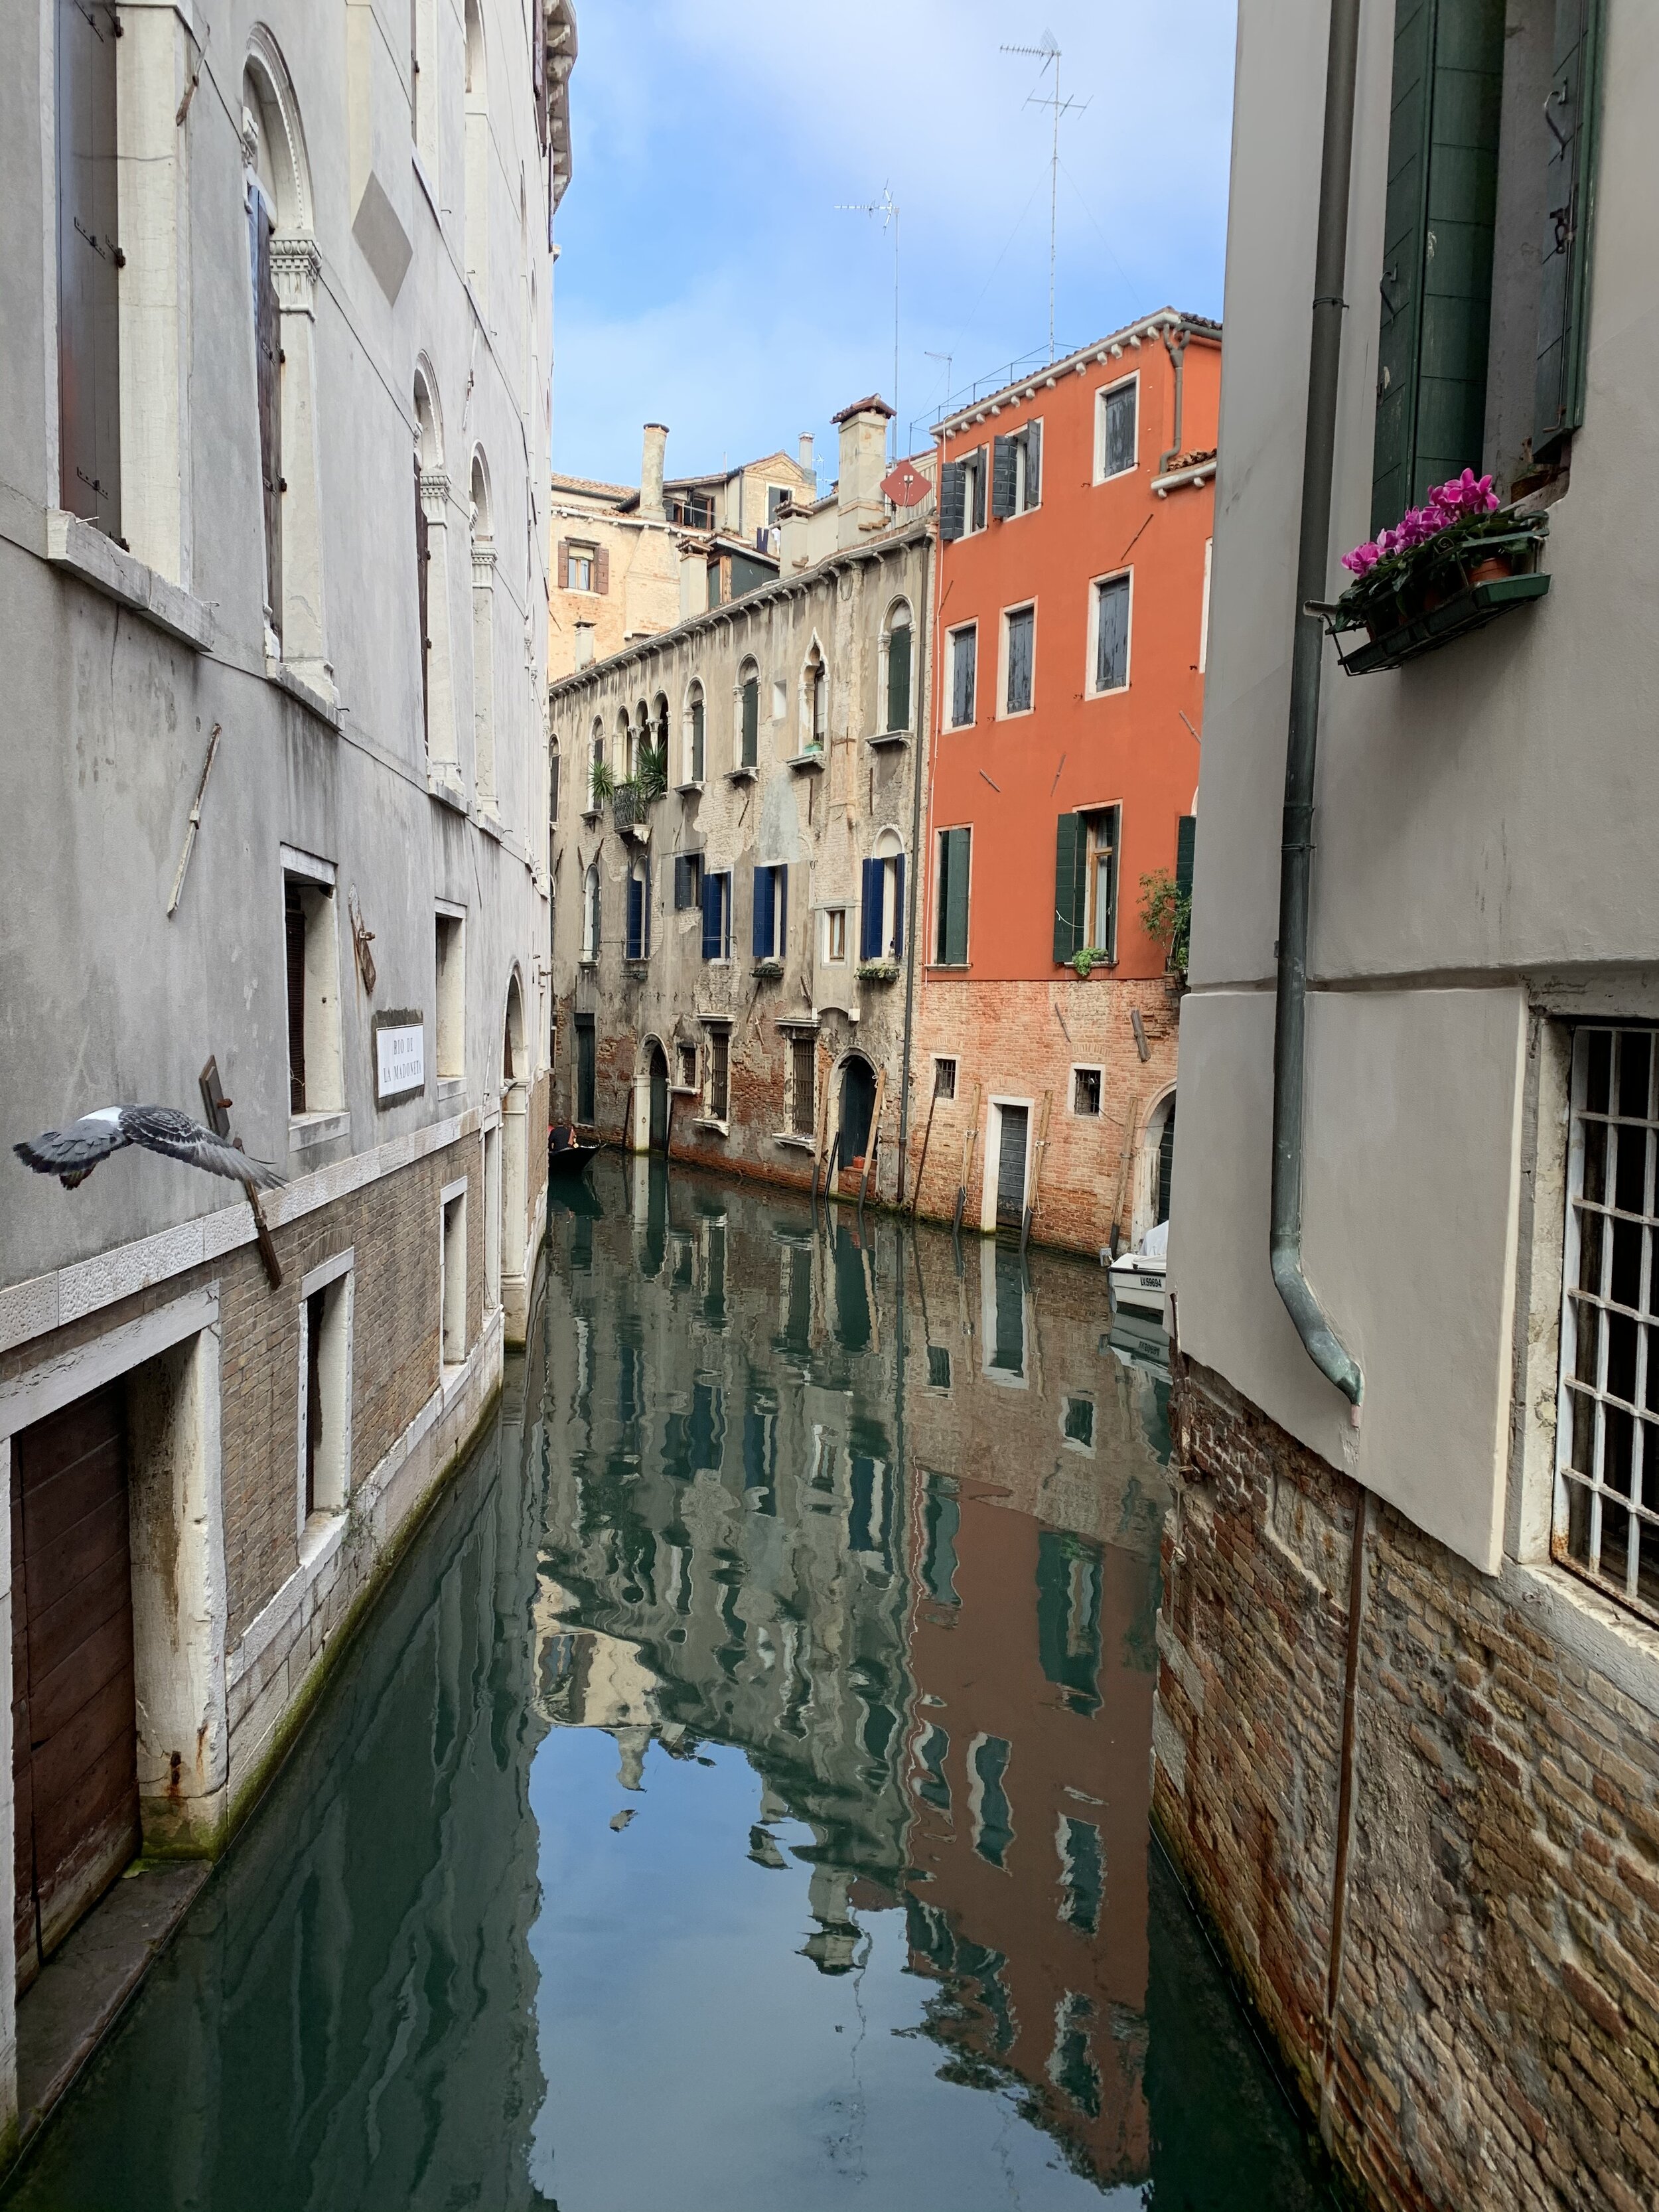 The oranges and teals of Venice | EAT.PRAY.MOVE Retreats | Venice, Italy 